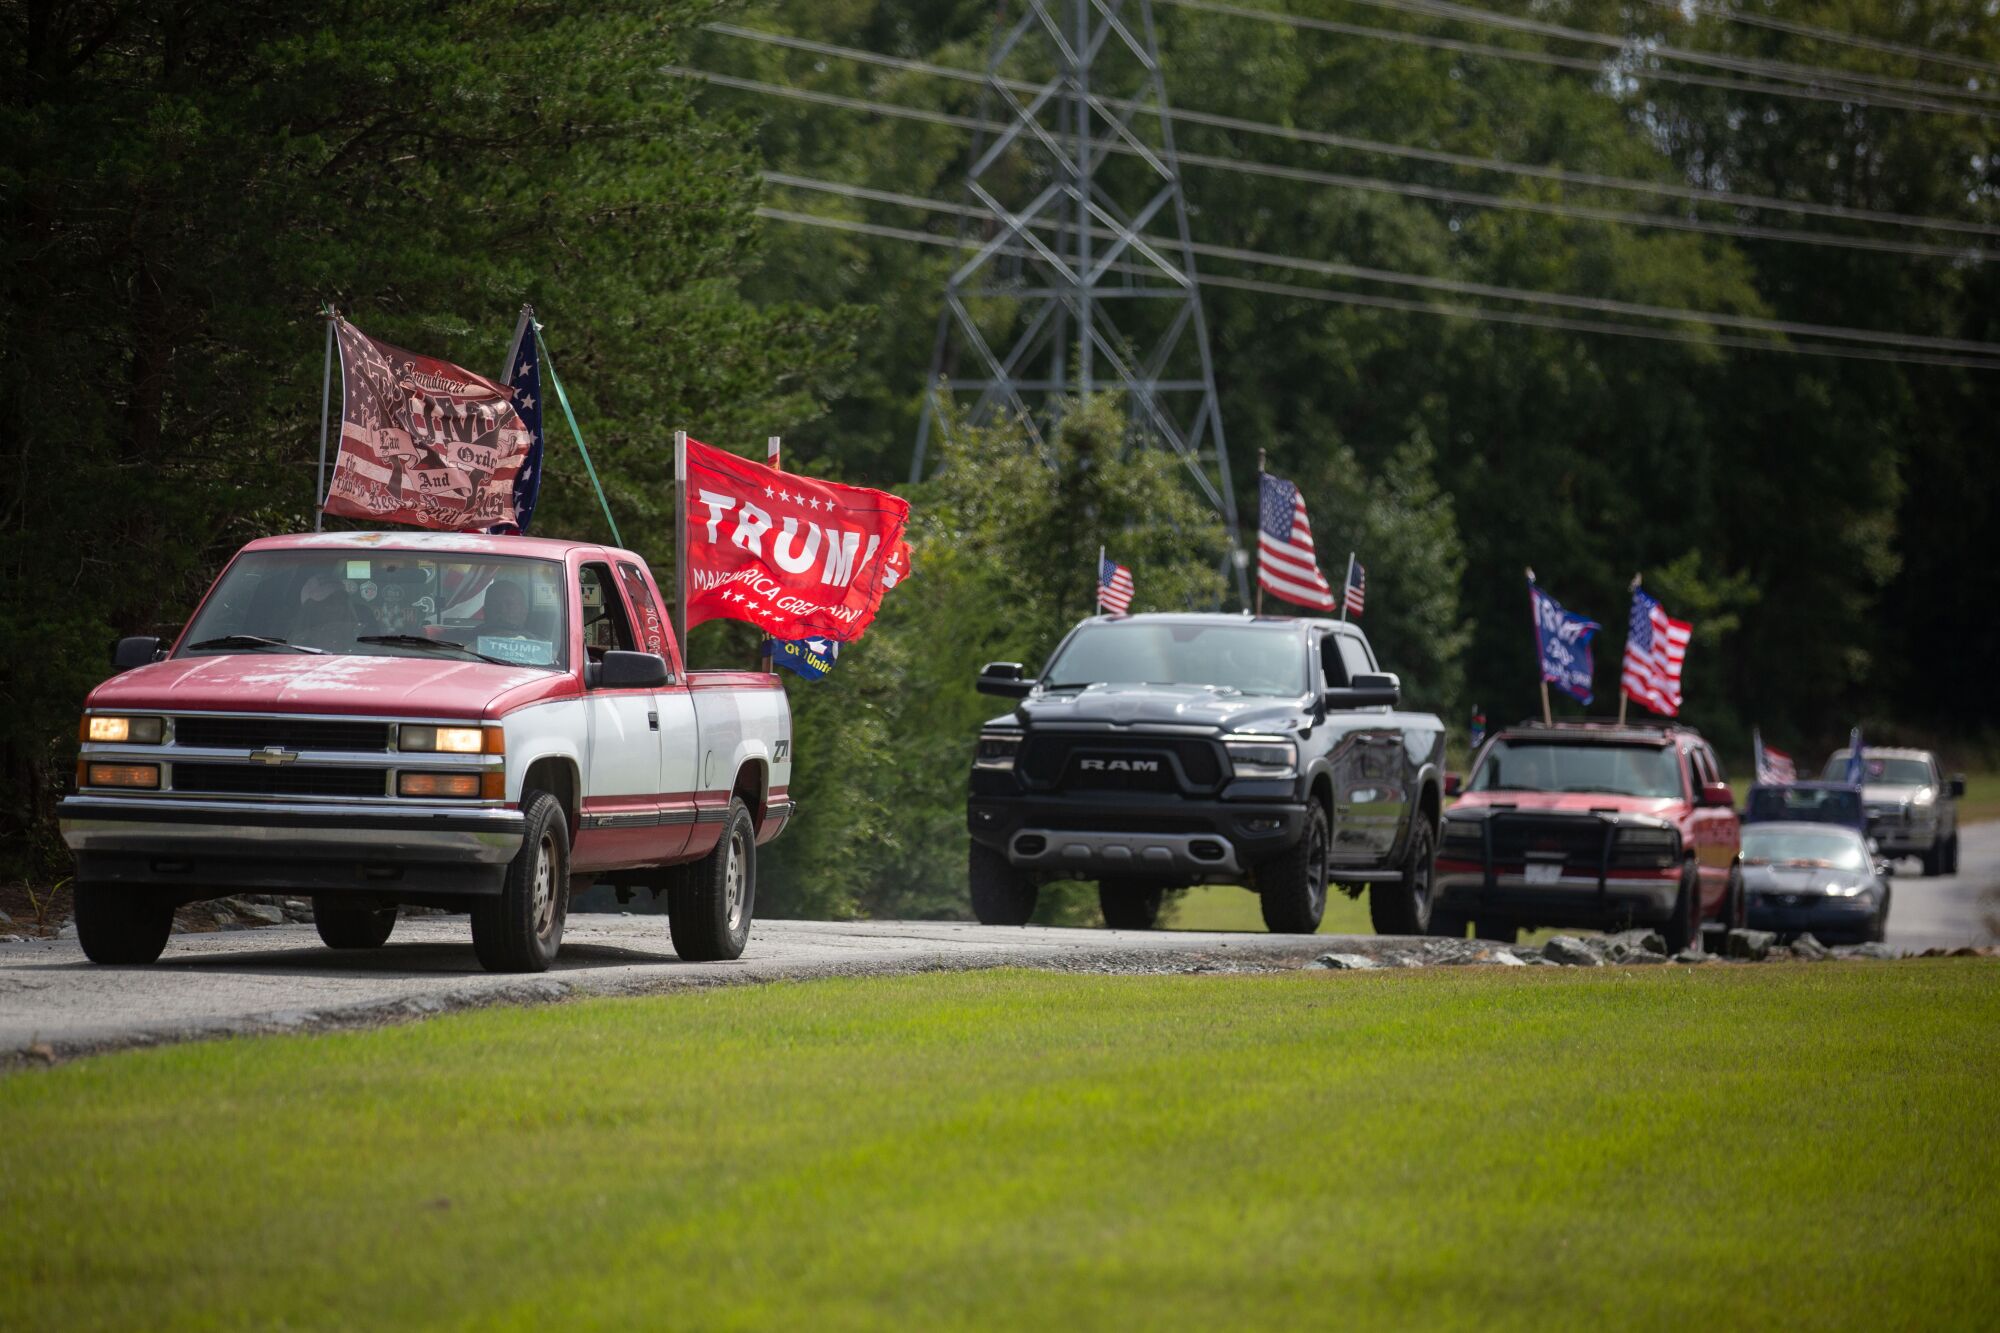 Trucks gather for a Trump rally in Elon, N.C. A few Latinos who support Trump attended.